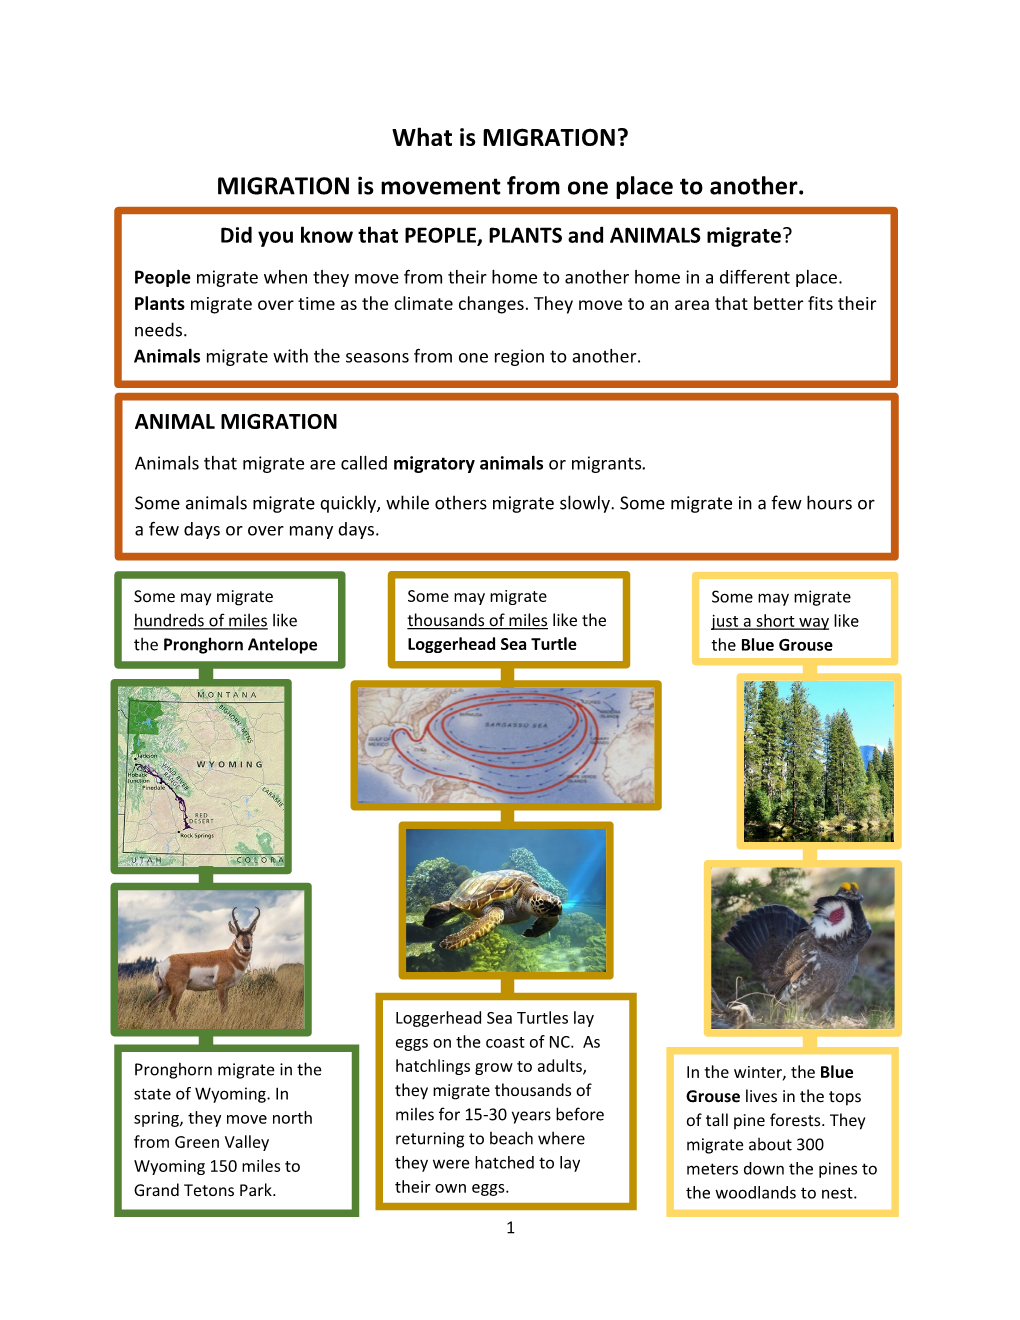 ANIMAL MIGRATION Animals That Migrate Are Called Migratory Animals Or Migrants